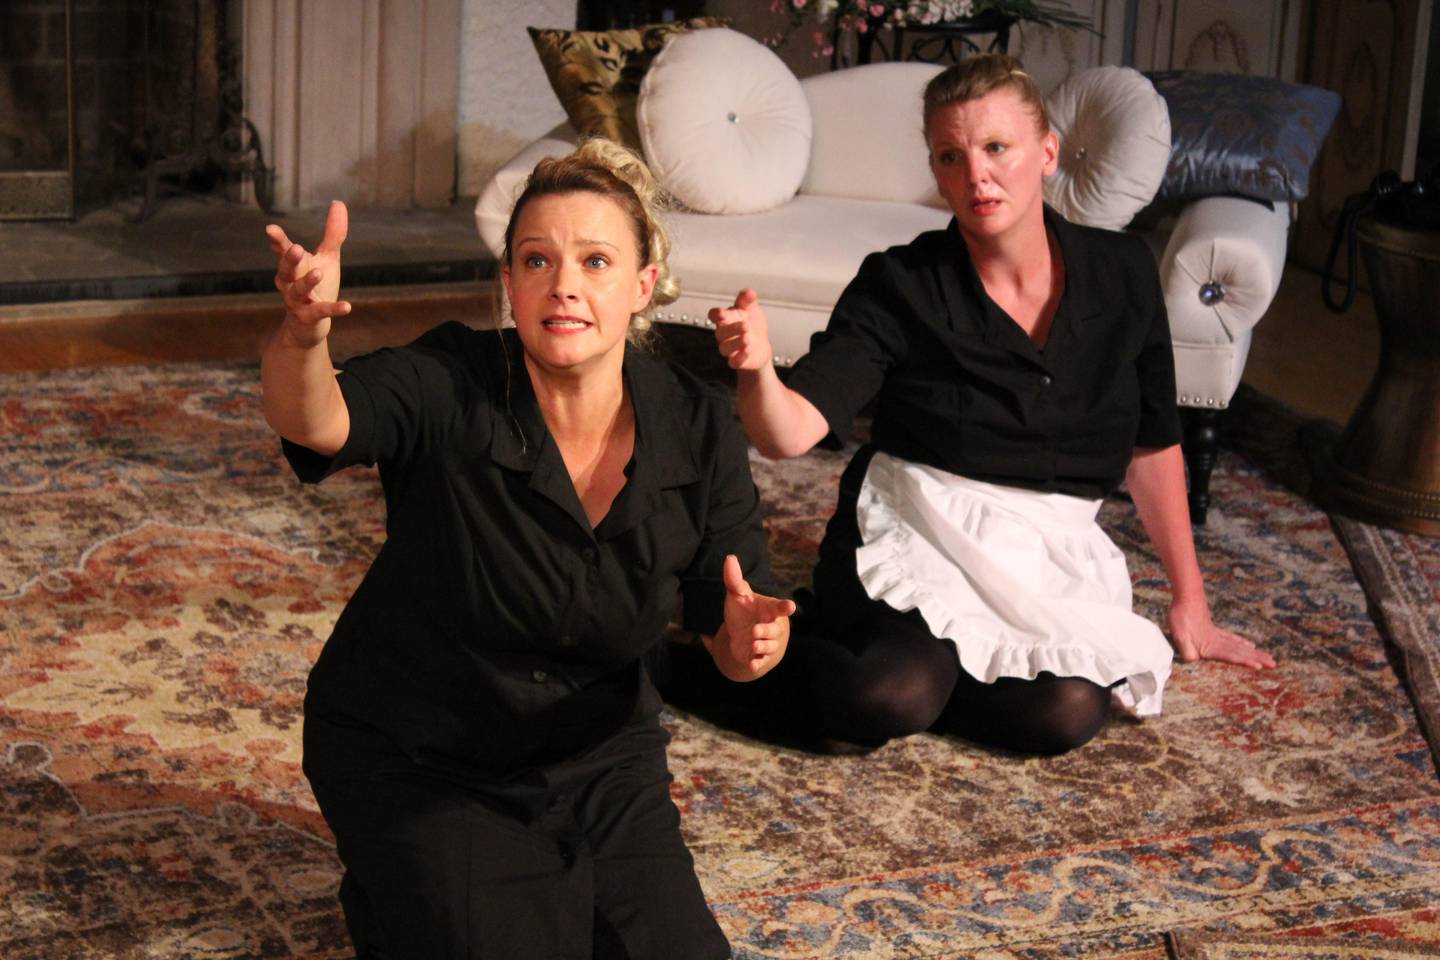 "The Maids" is presented by Janus Theatre Company.